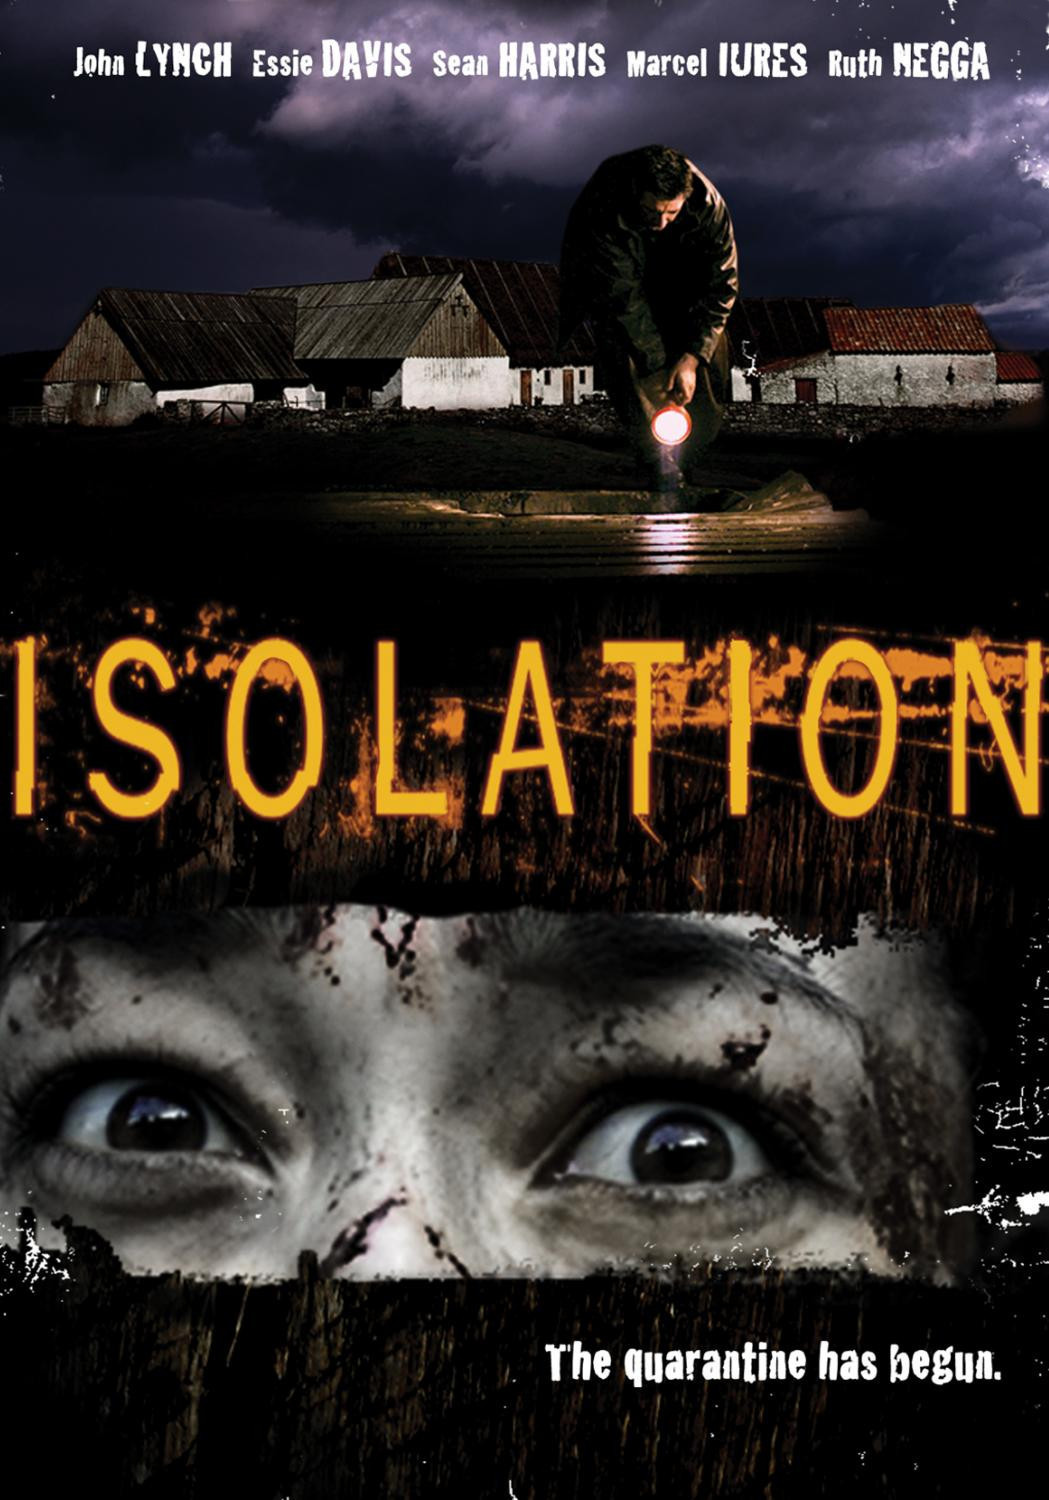 Poster for the movie "Isolation"